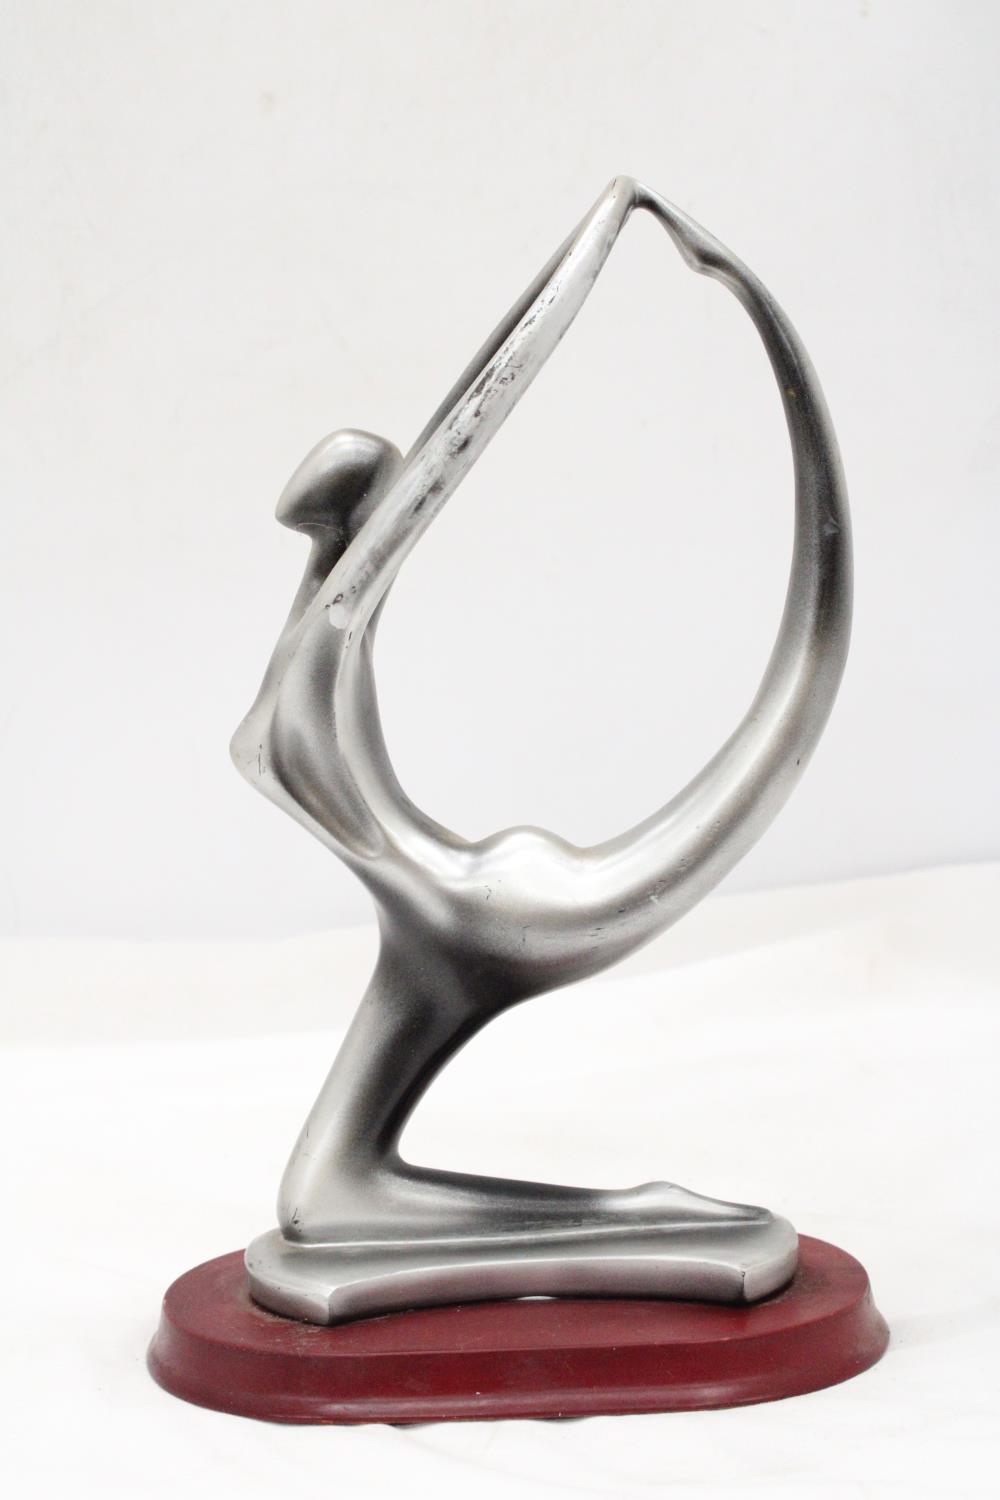 AN ART DECO, NUDE LADY, ALUMINIUM GYMNAST ON A WOODEN BASE, HEIGHT 30CM - Image 4 of 5